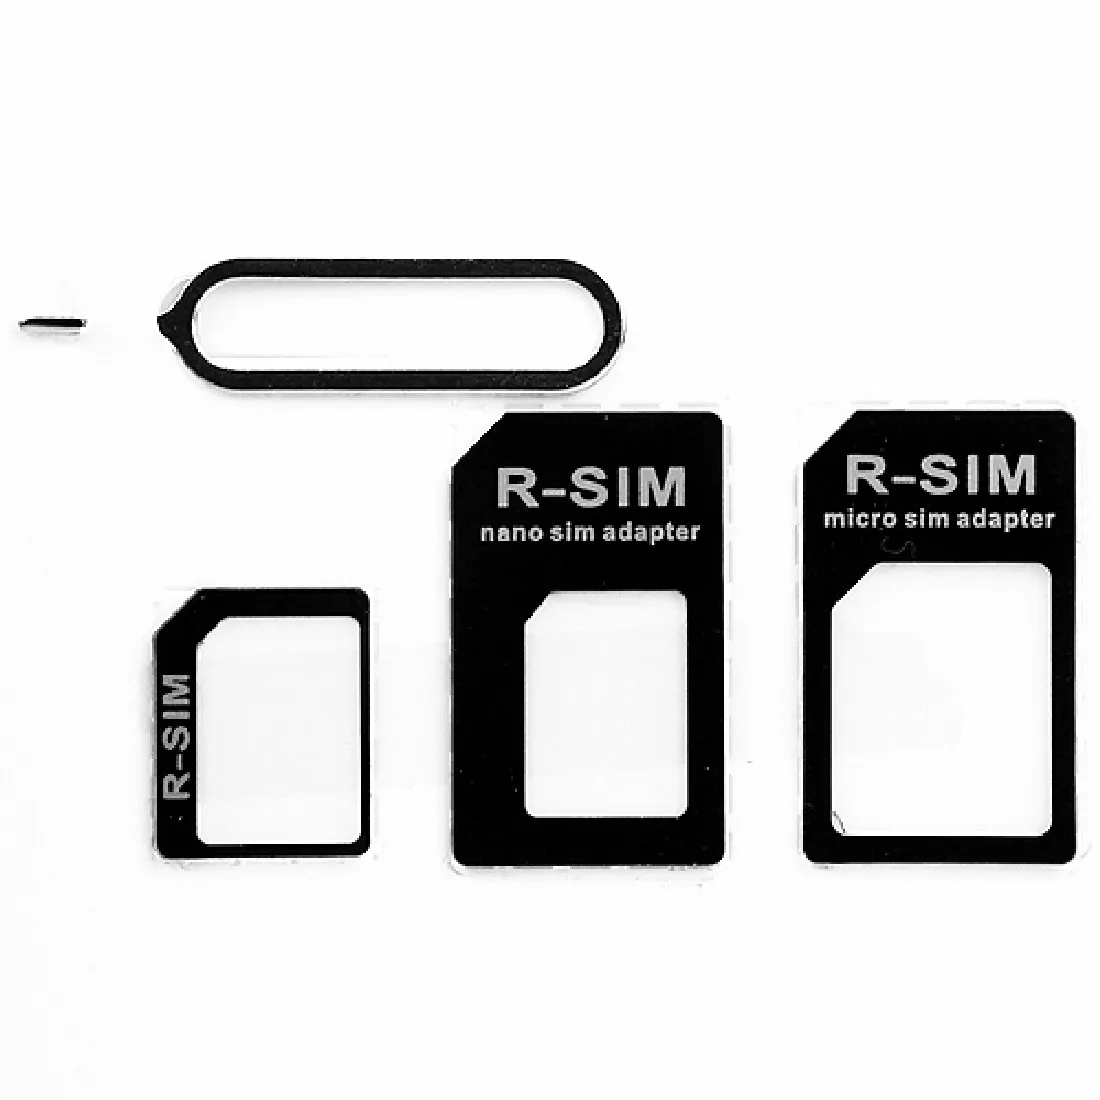 

SIM Card Adapter 3 in 1 micro sim adapter with Eject Pin Key Retail Package for iPhone 5/5S/6/6S/ Samsung 70 80